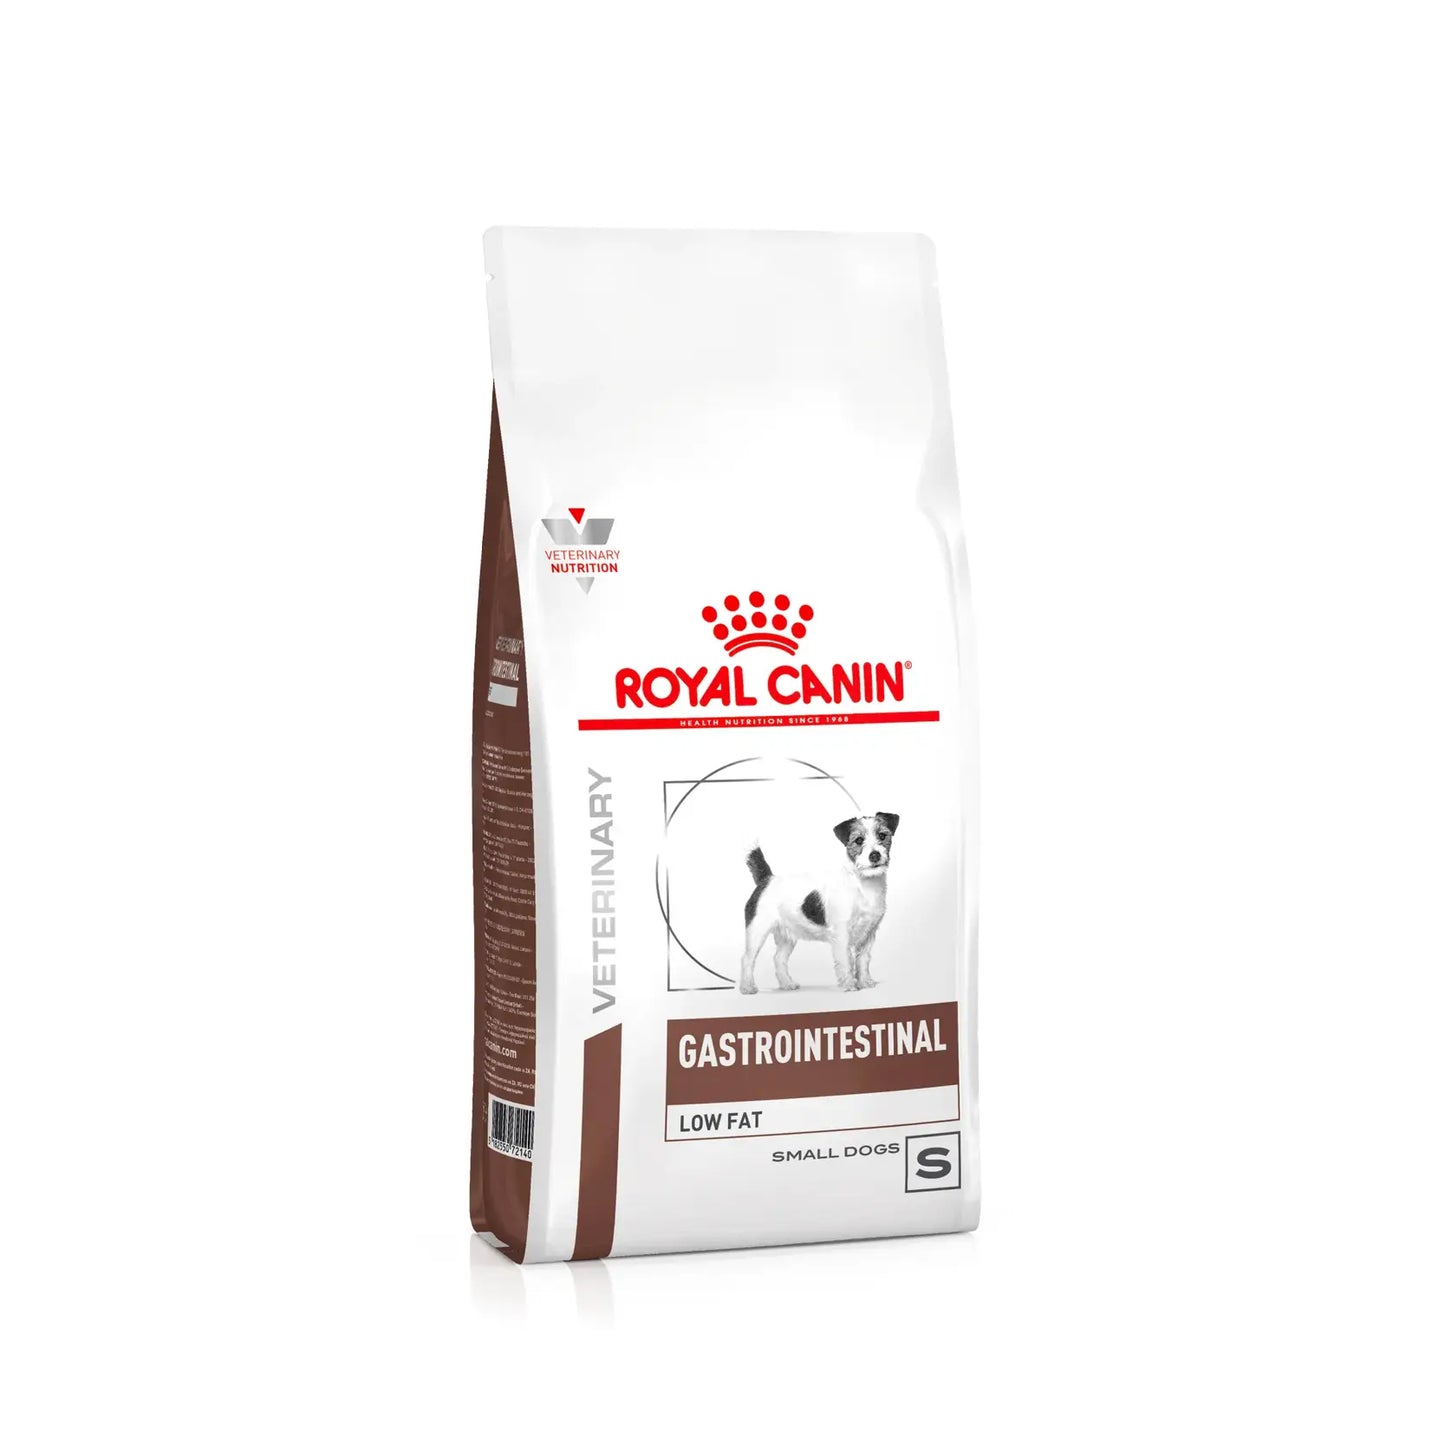 Royal Canin Canine Gastro Intestinal Low Fat Small Dog Dry Food